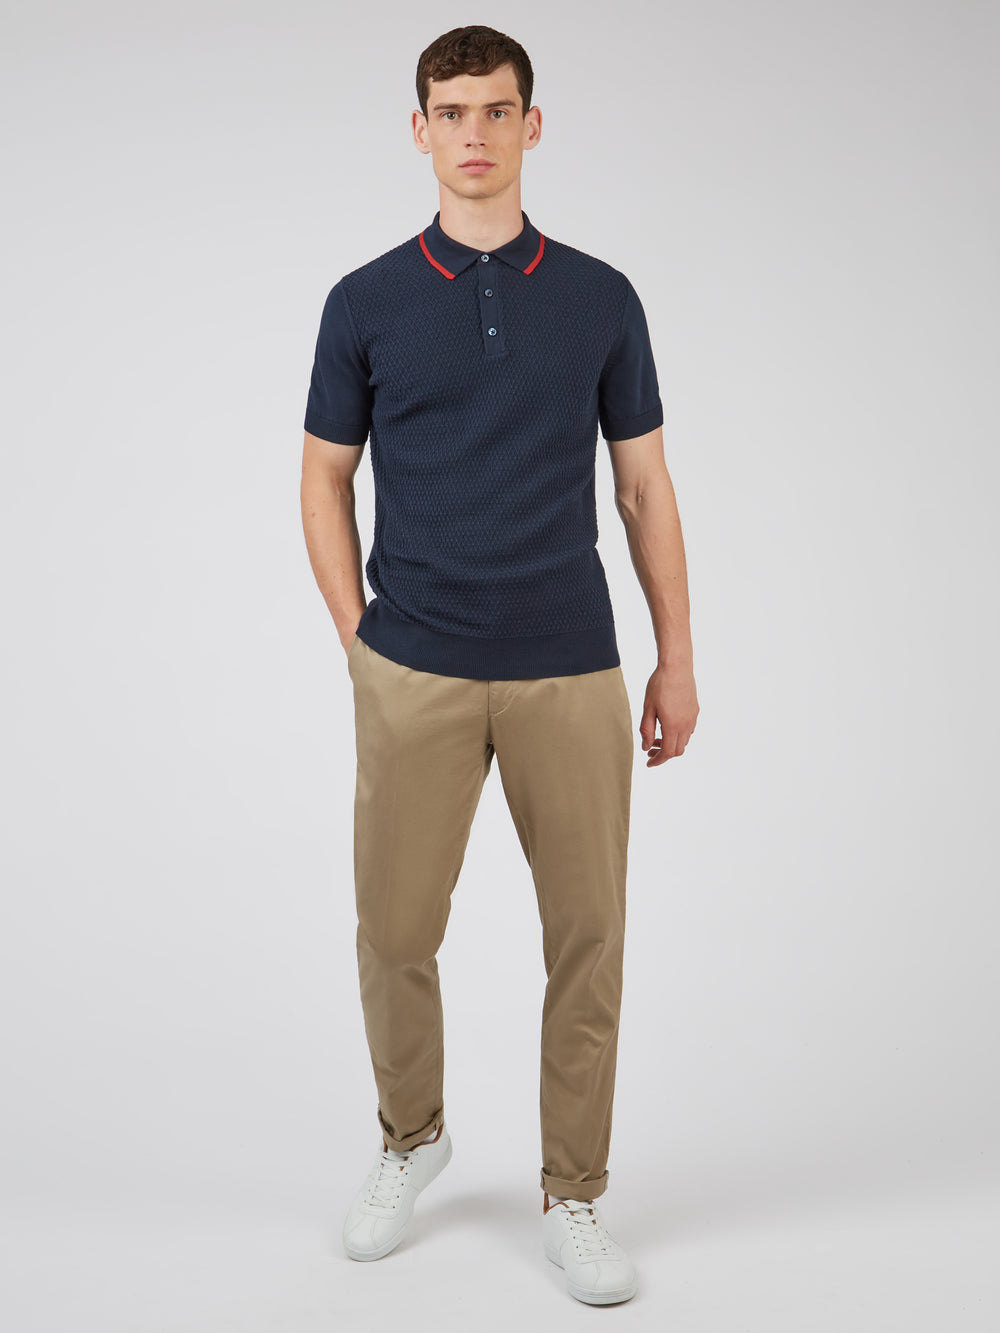 Textured Knit Contrast Tip Polo - Navy - Ben Sherman